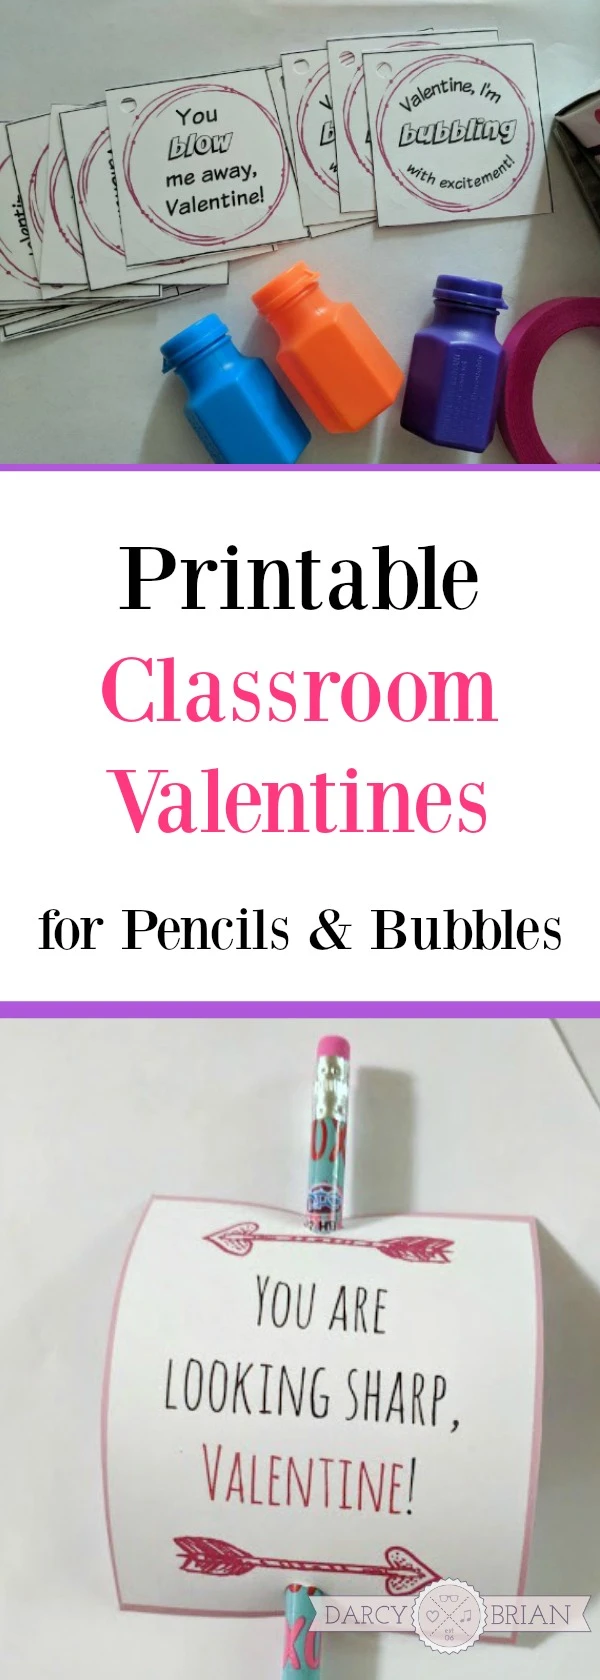 Looking for classroom valentine printables? These are easy to put together last minute for your child to give out at school for Valentine's Day. Cute pencil valentines and mini bubbles valentines.